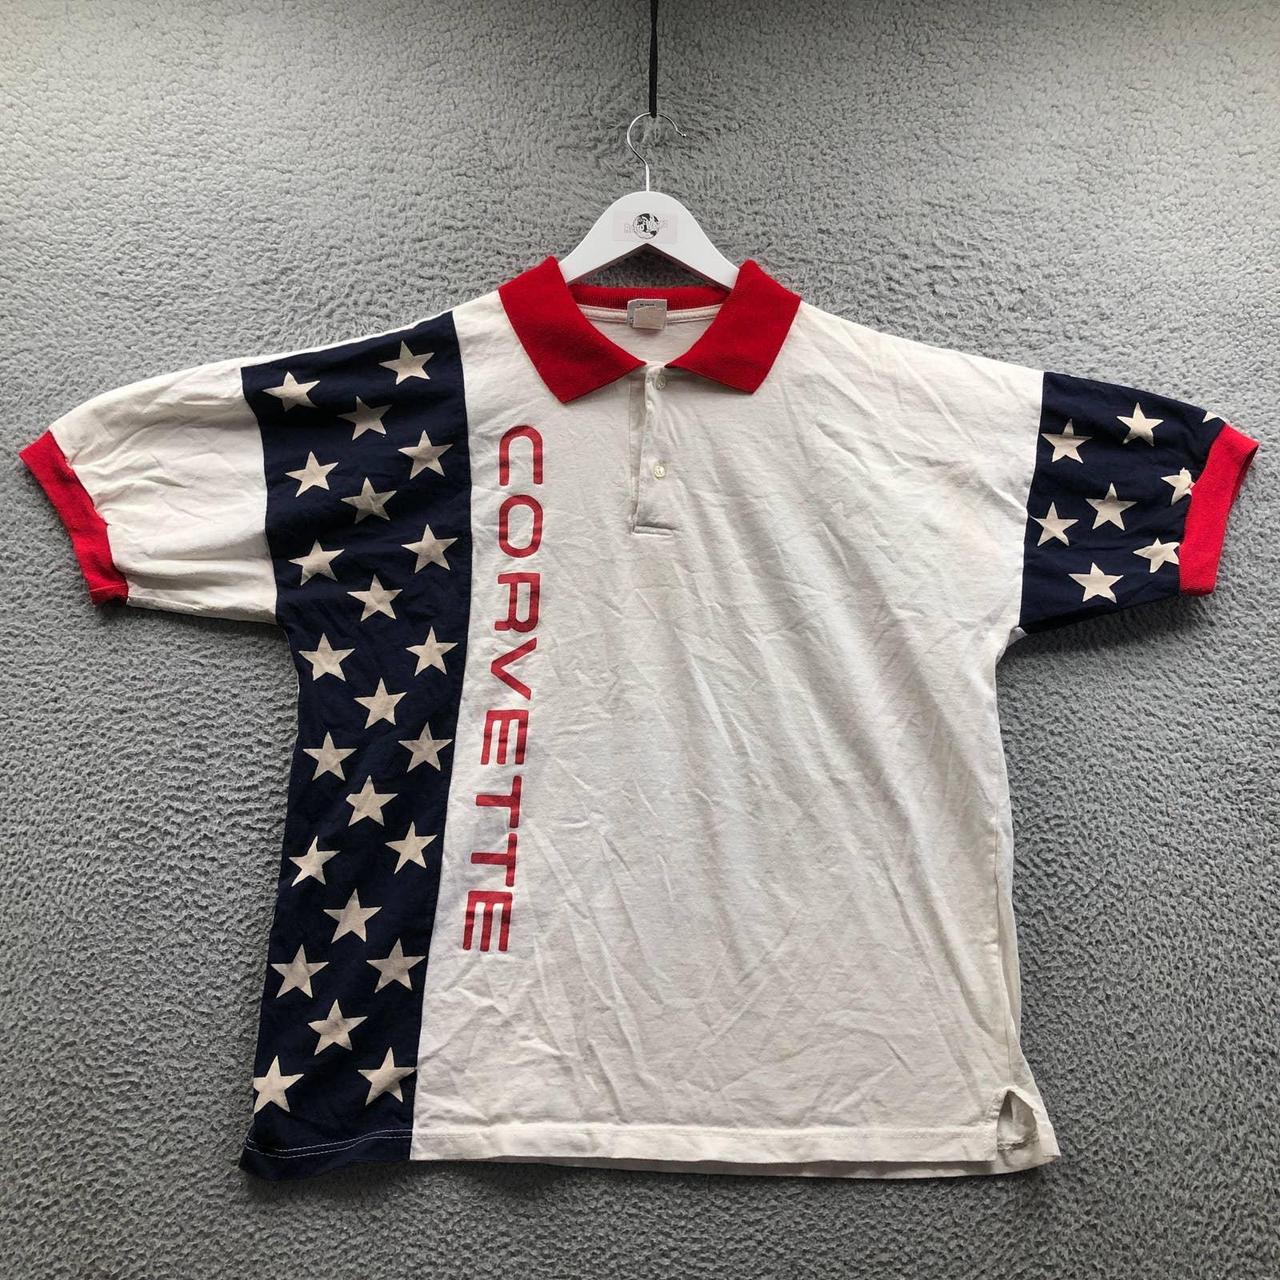 Small Grey USA Water Polo Tee with large Graphic on - Depop